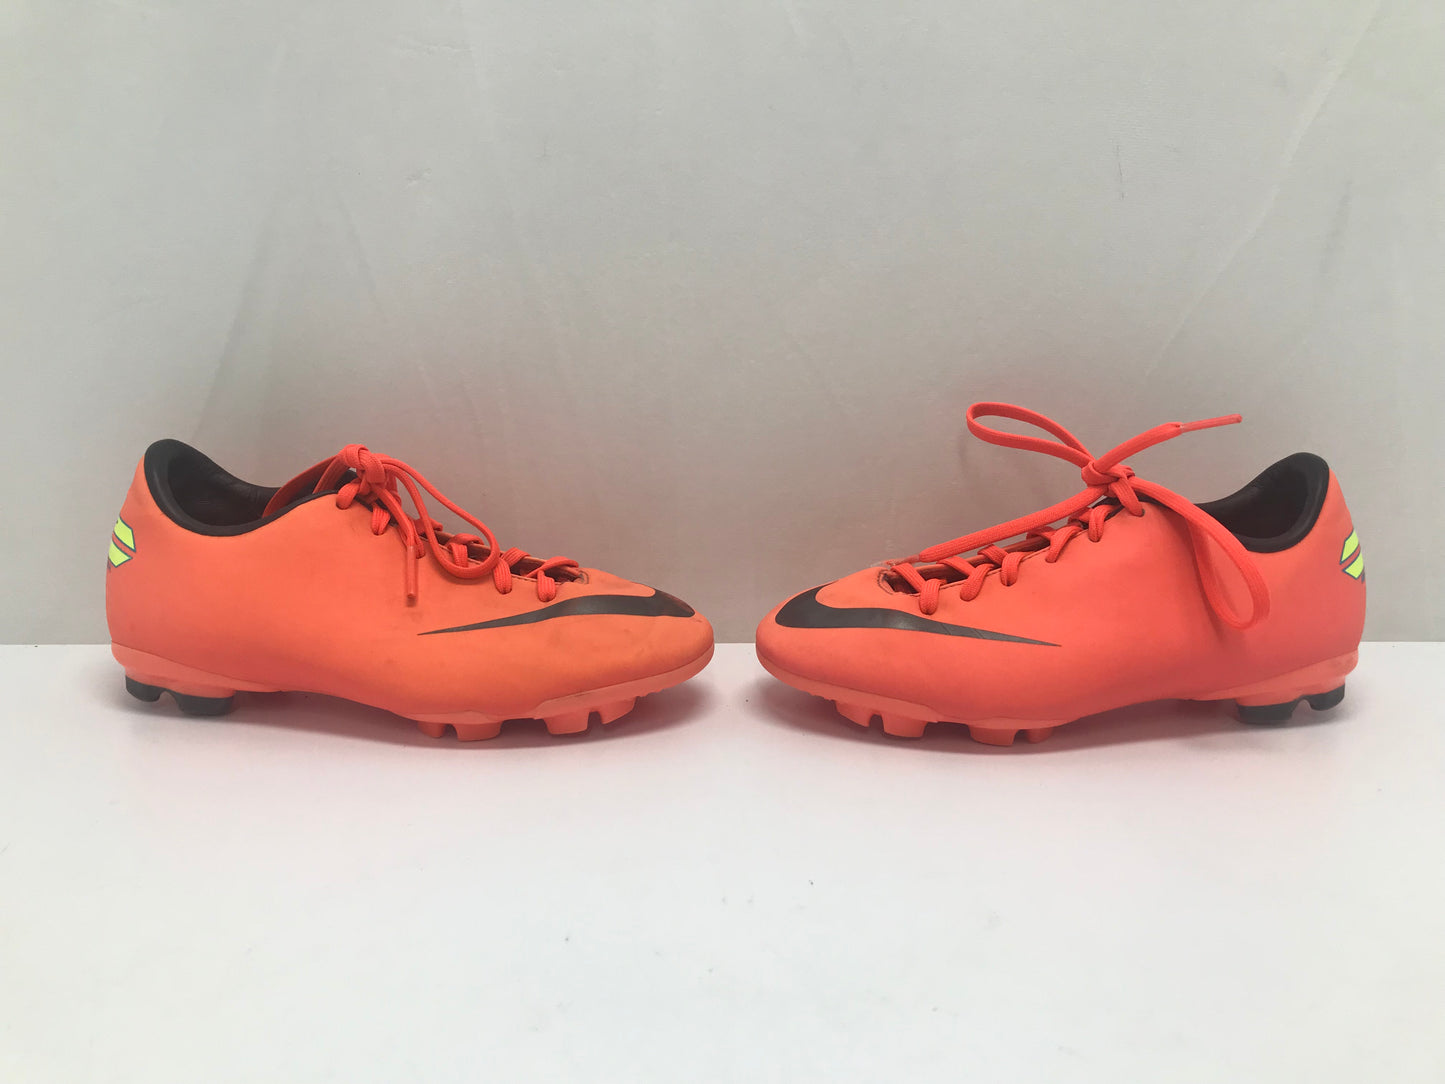 Soccer Shoes Cleats Child Size 1 Nike Mercurial Tangerine Lime Black Minor Marks